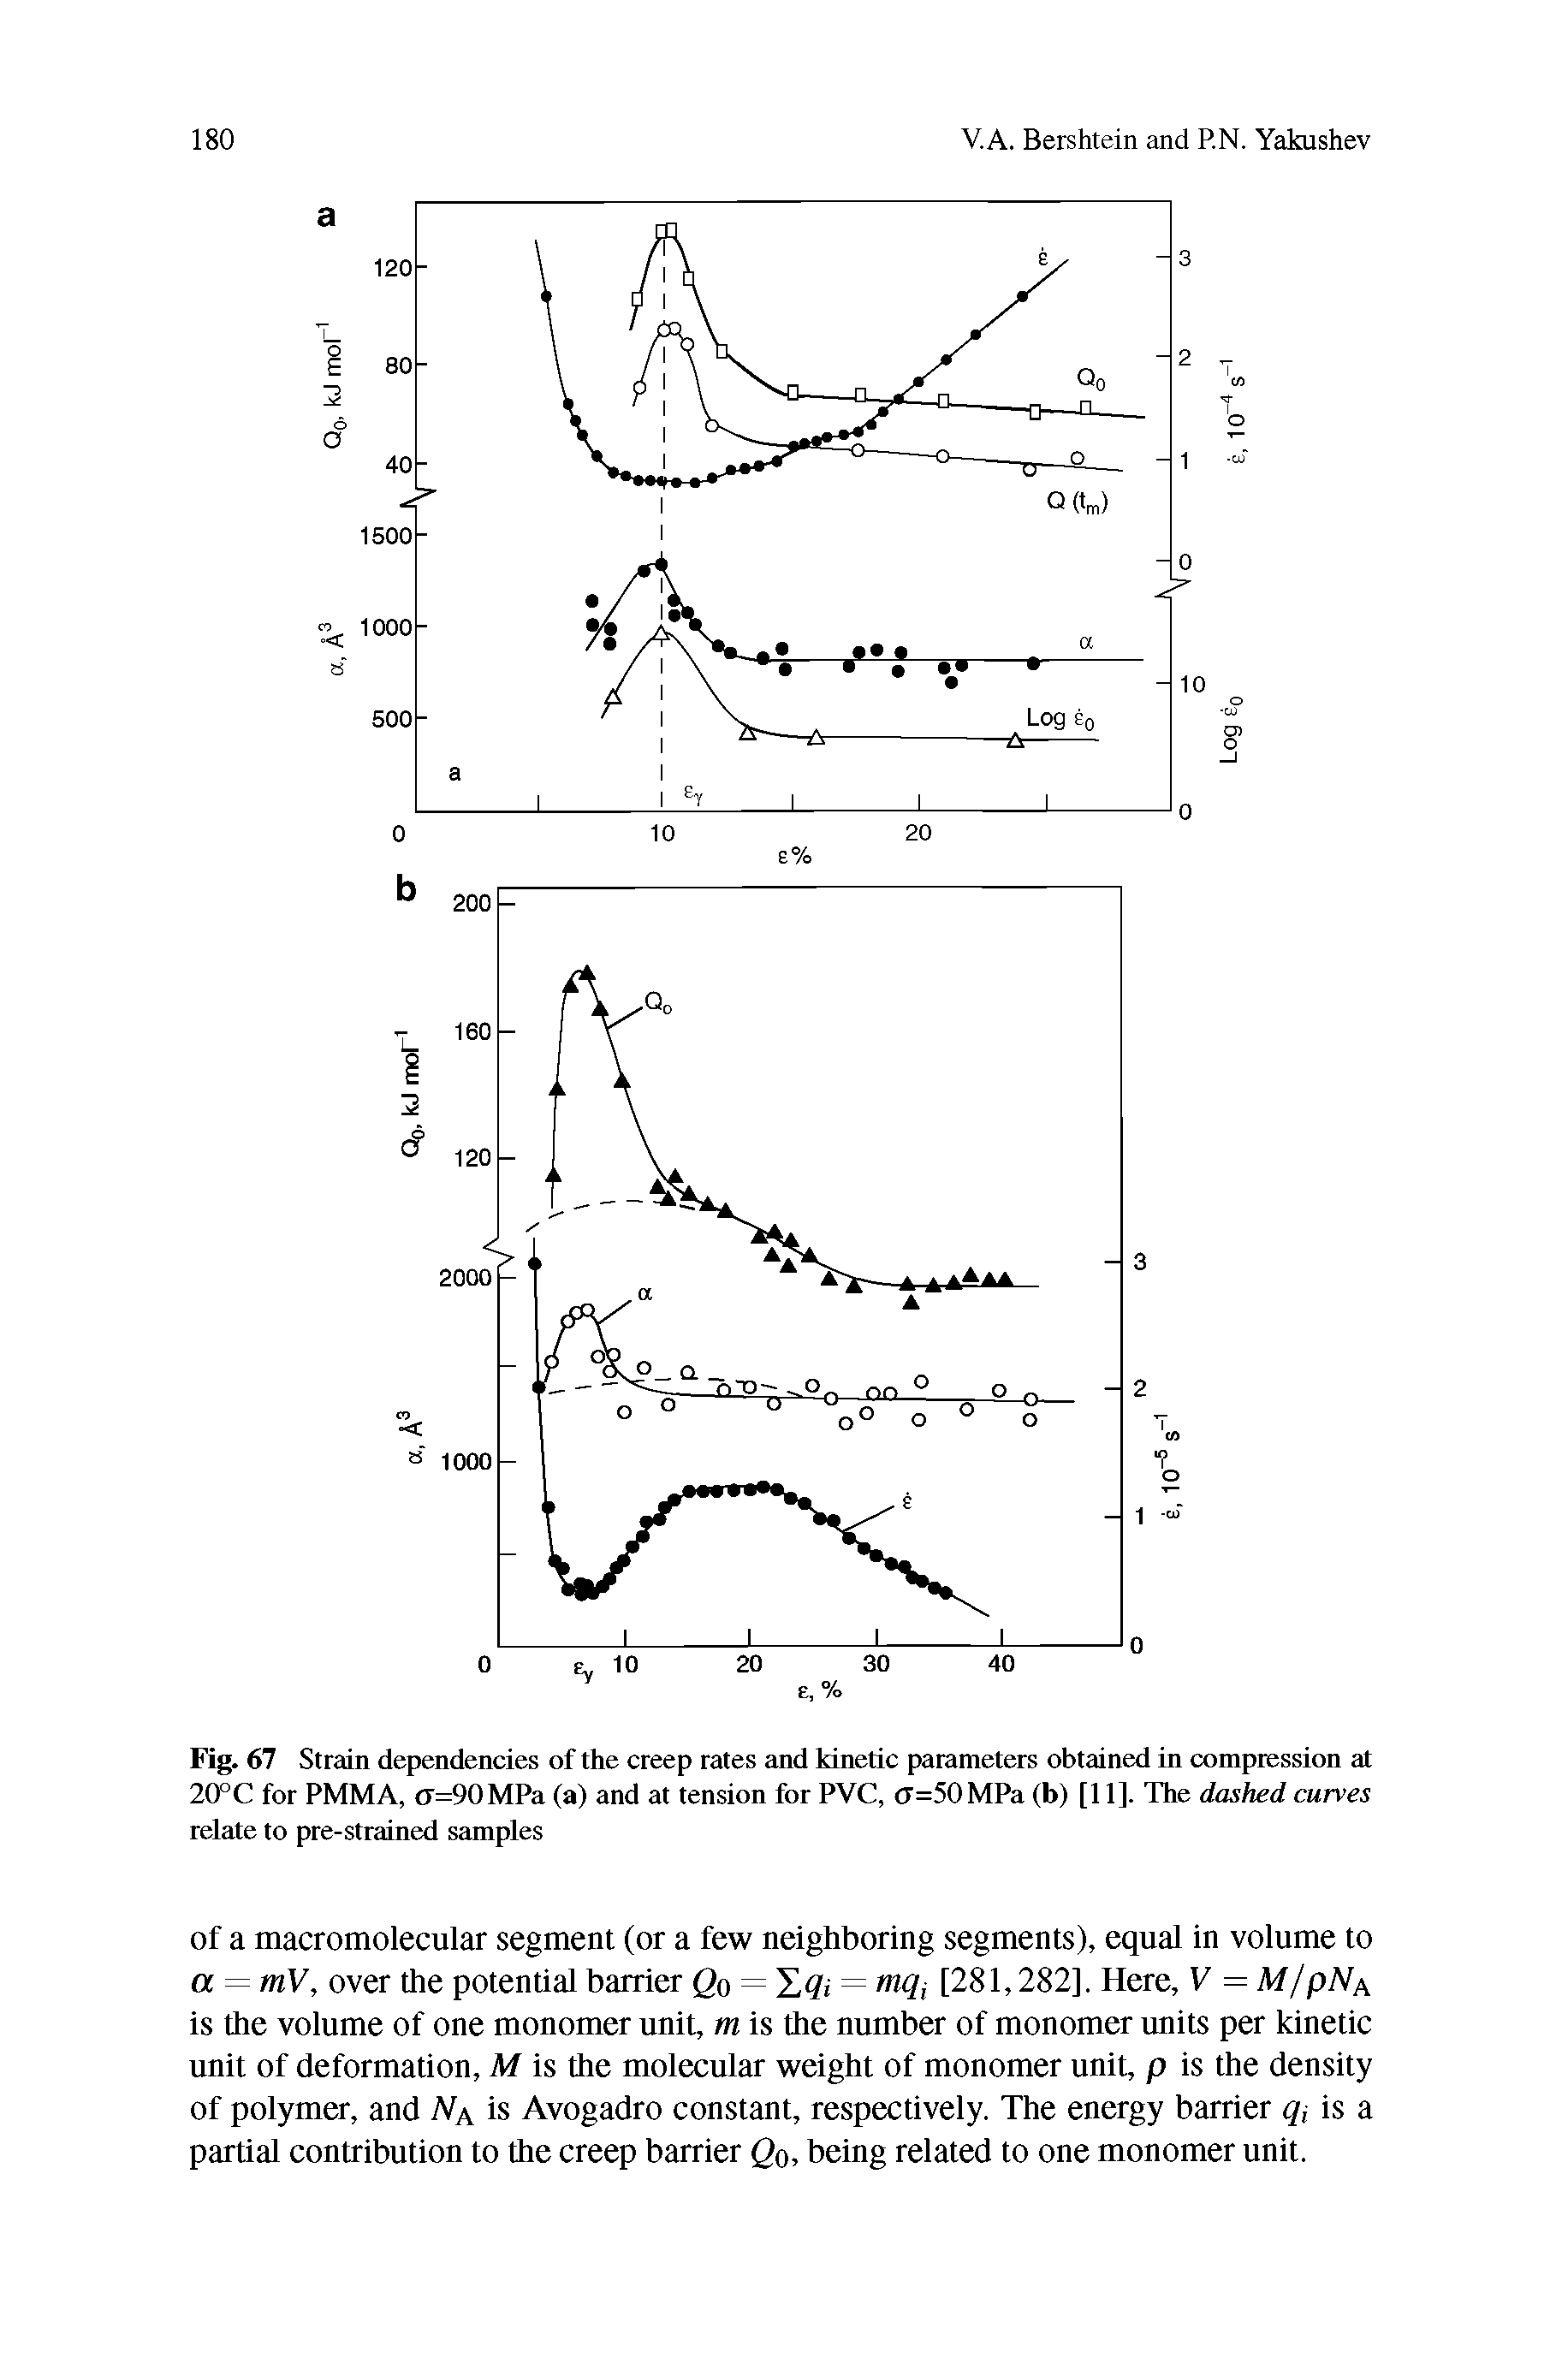 Fig. 67 Strain dependencies of the creep rates and kinetic parameters obtained in compression at 20°C for PMMA, ff=90MPa (a) and at tension for PVC, (7=50 MPa (b) [11]. The dashed curves relate to pre-strained samples...